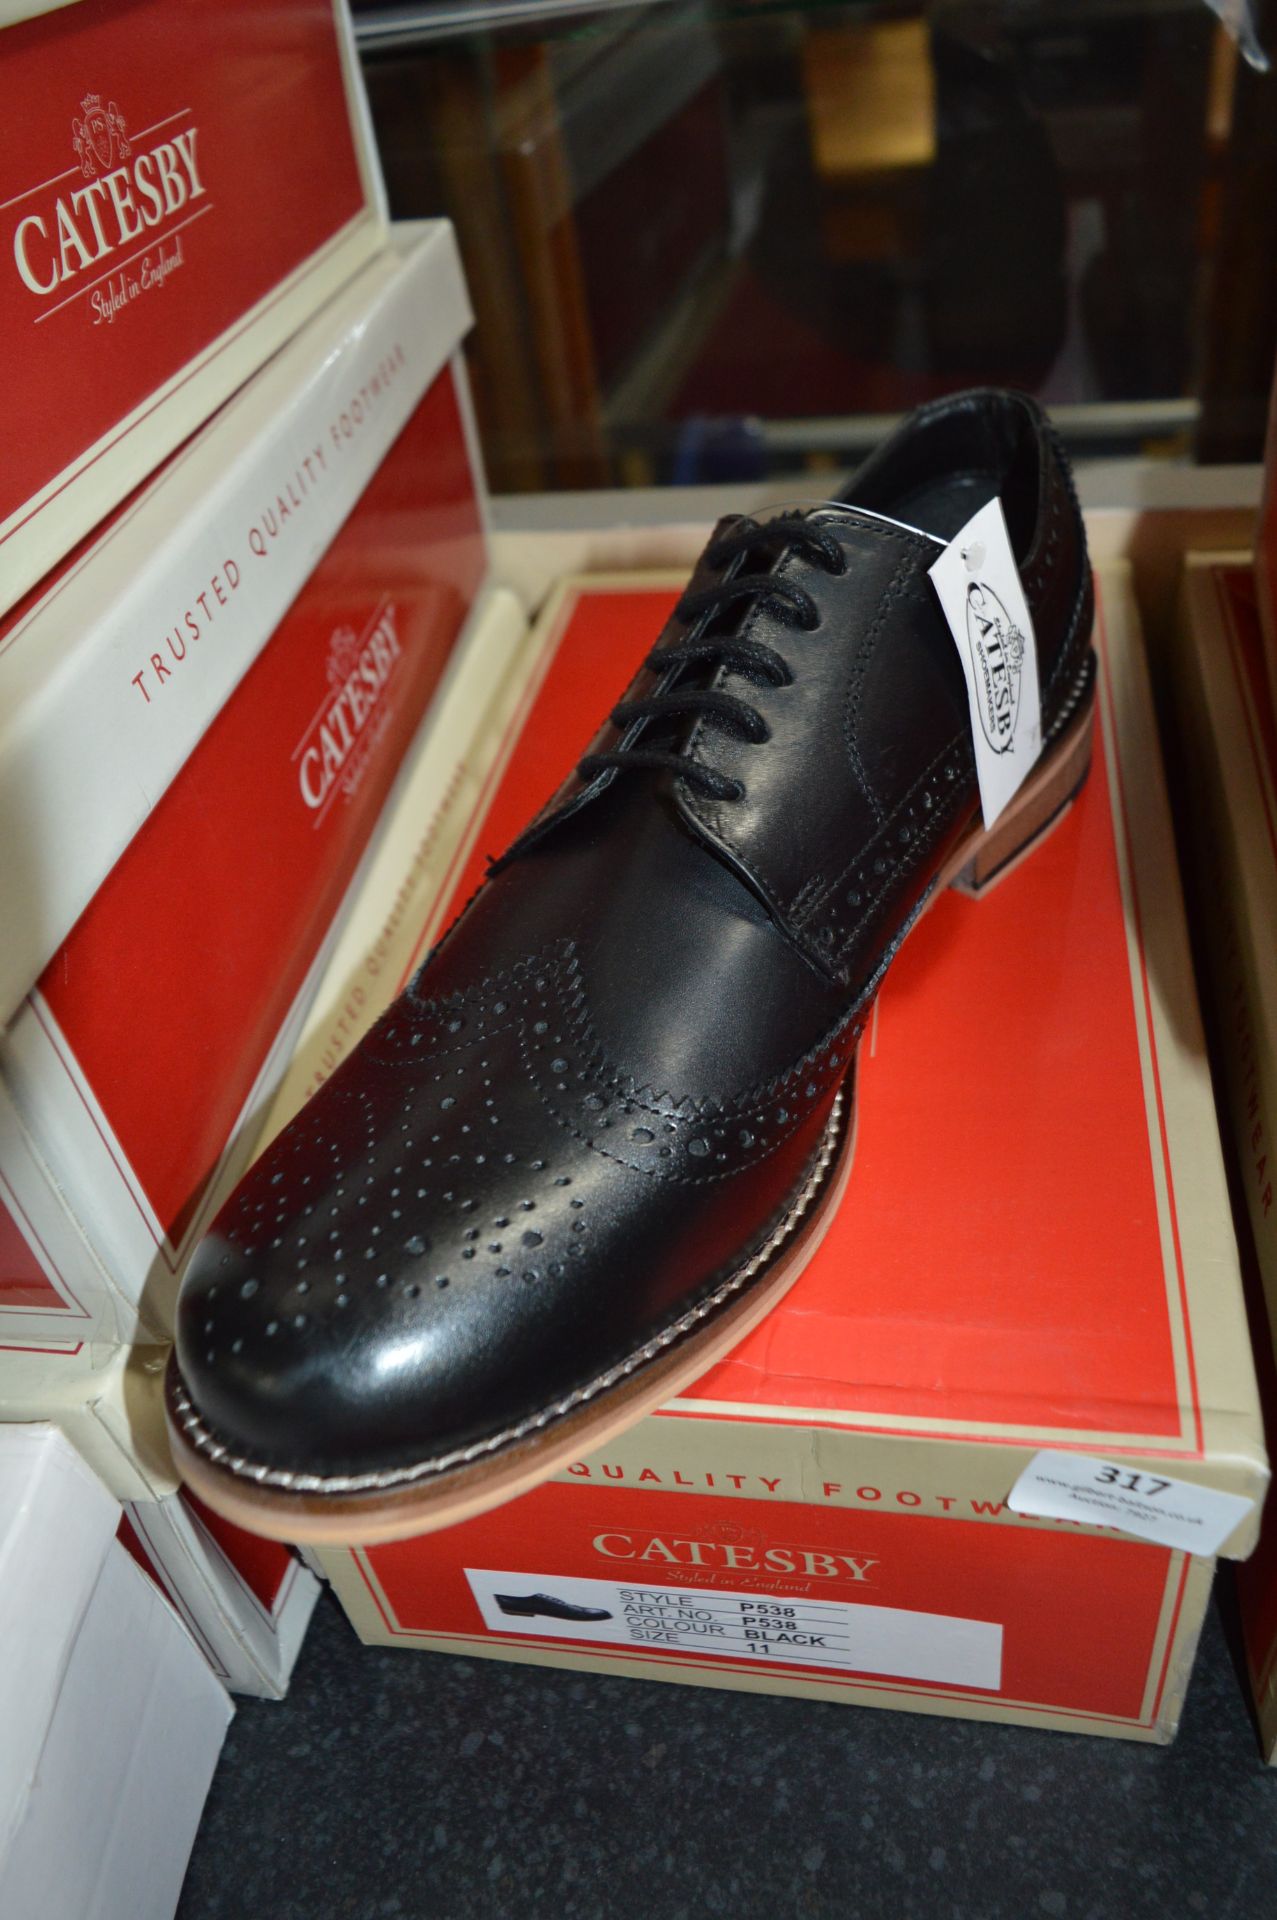 Catesby Gents Black Leather Brogues Size:12